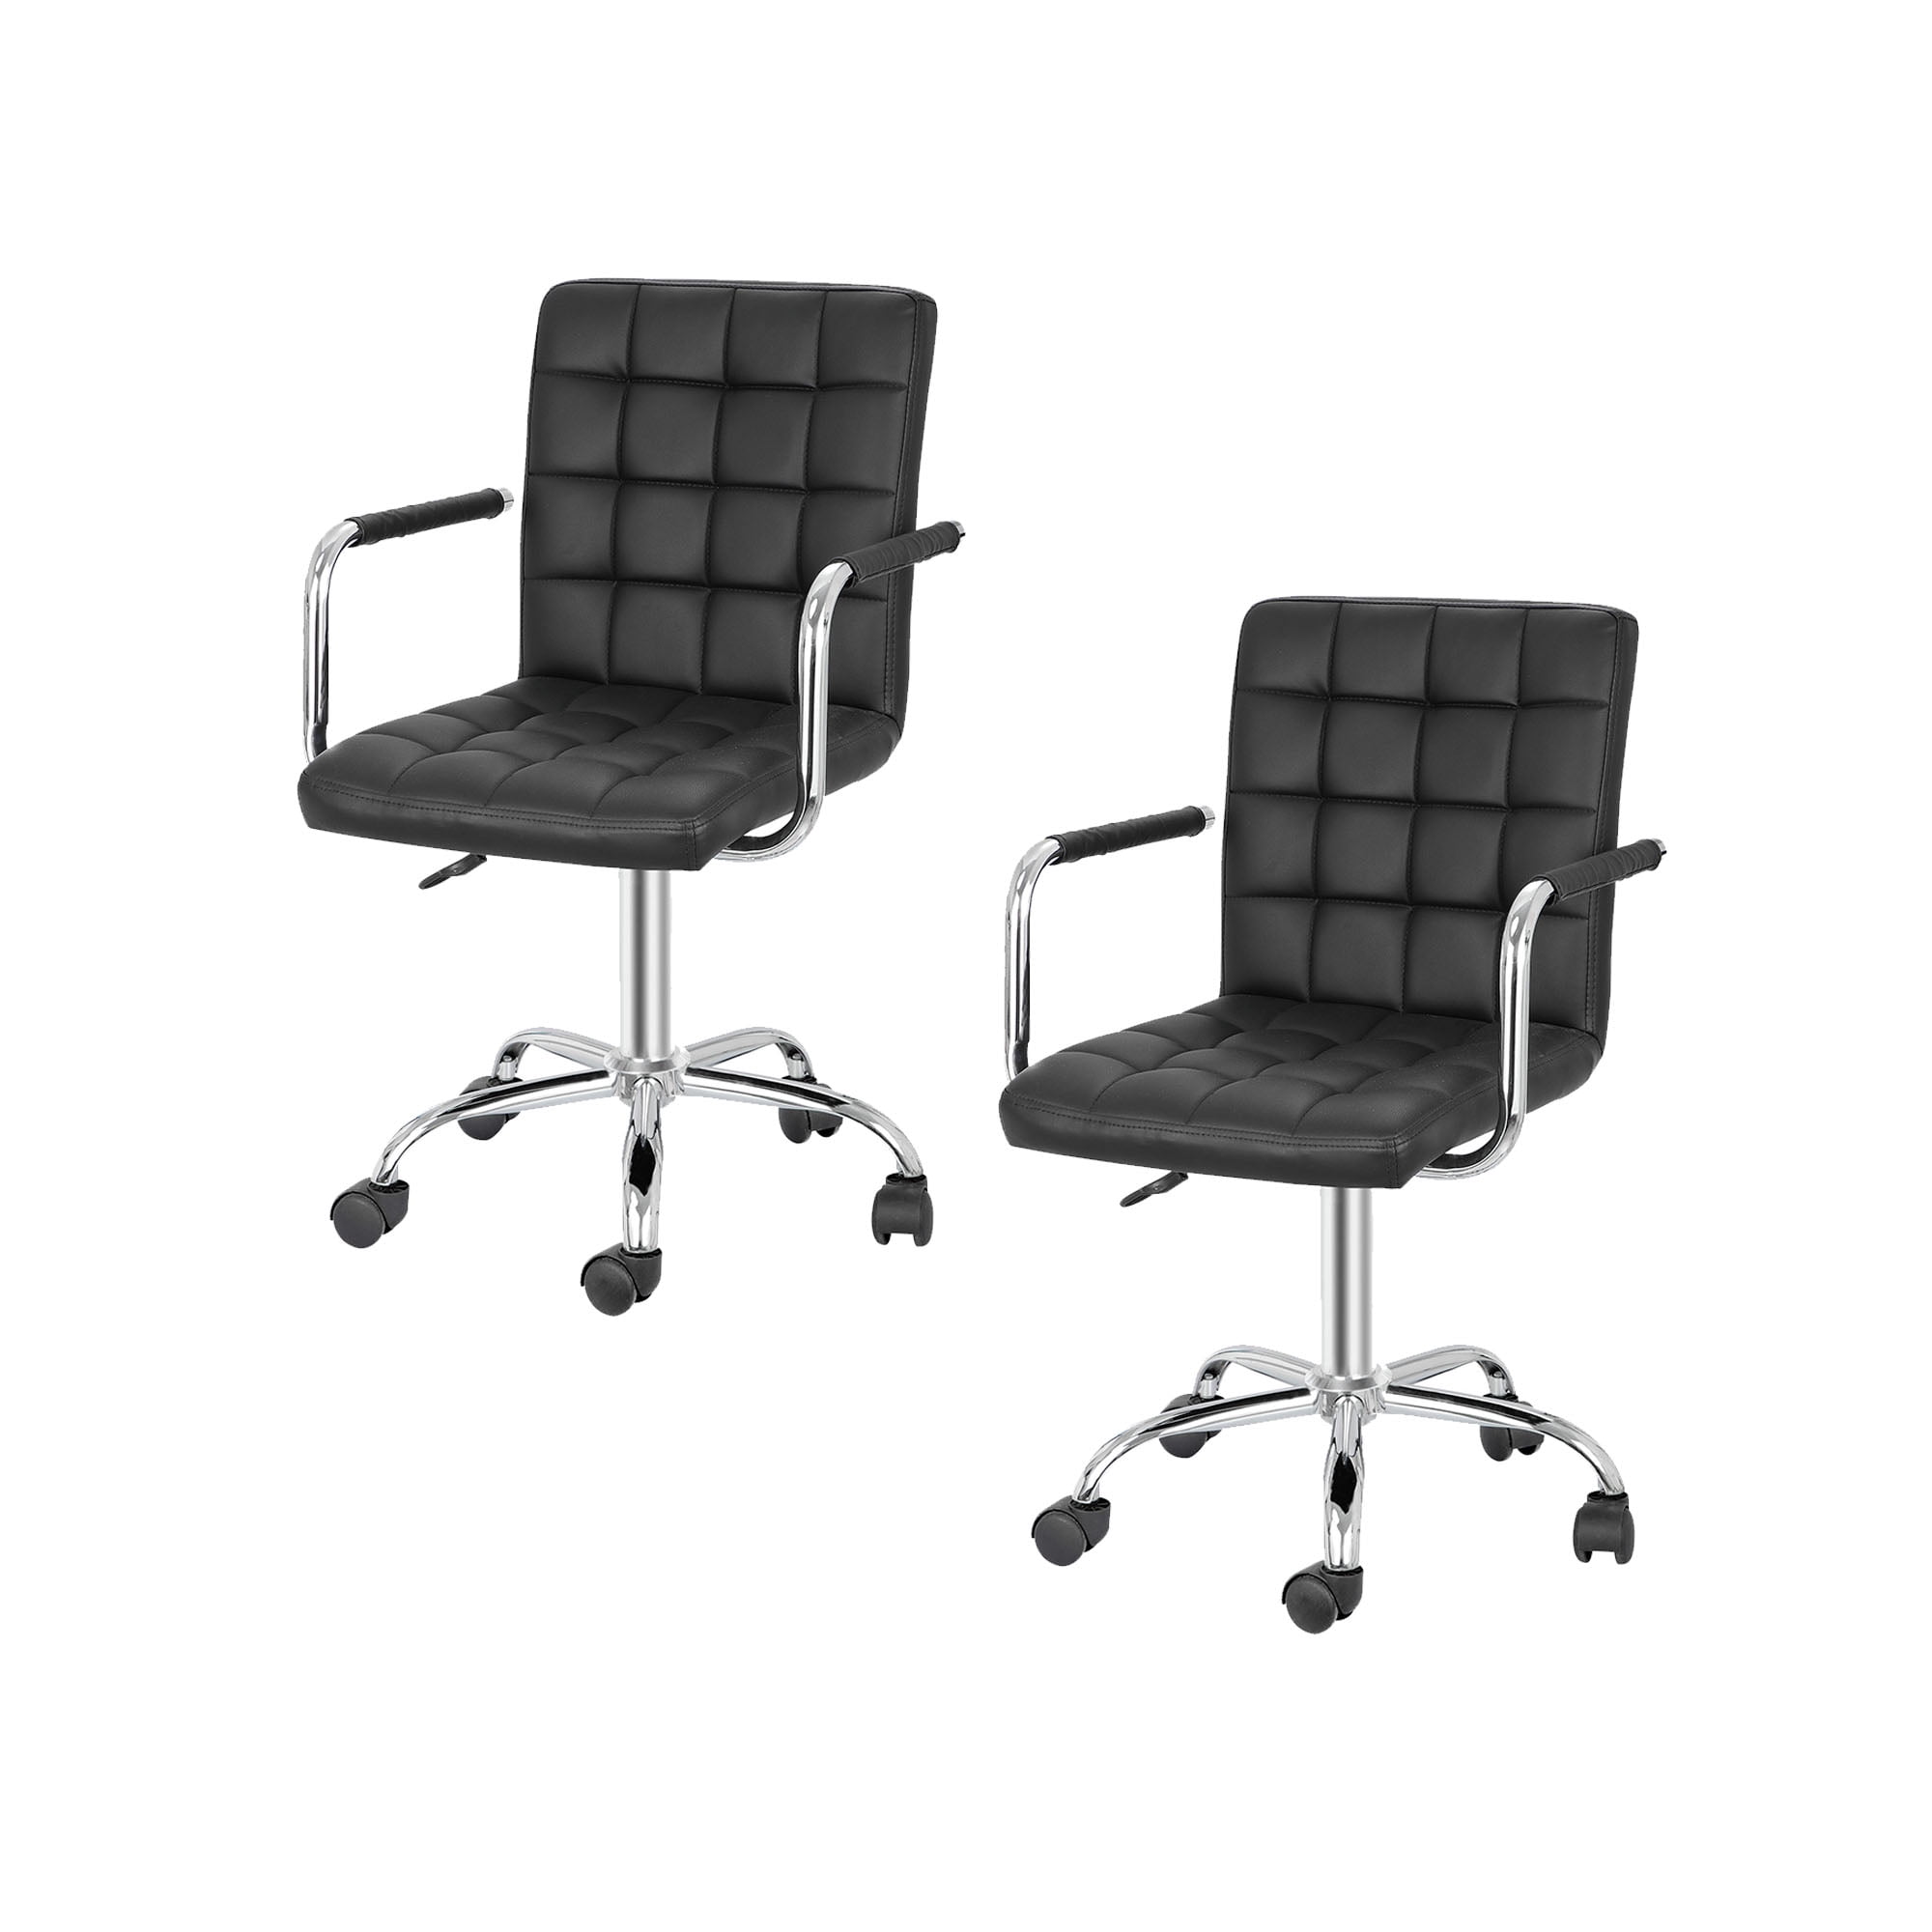 2x Office Computer Shop Home Faux Leather Chair Swivel Studio Salon Barber Stool 